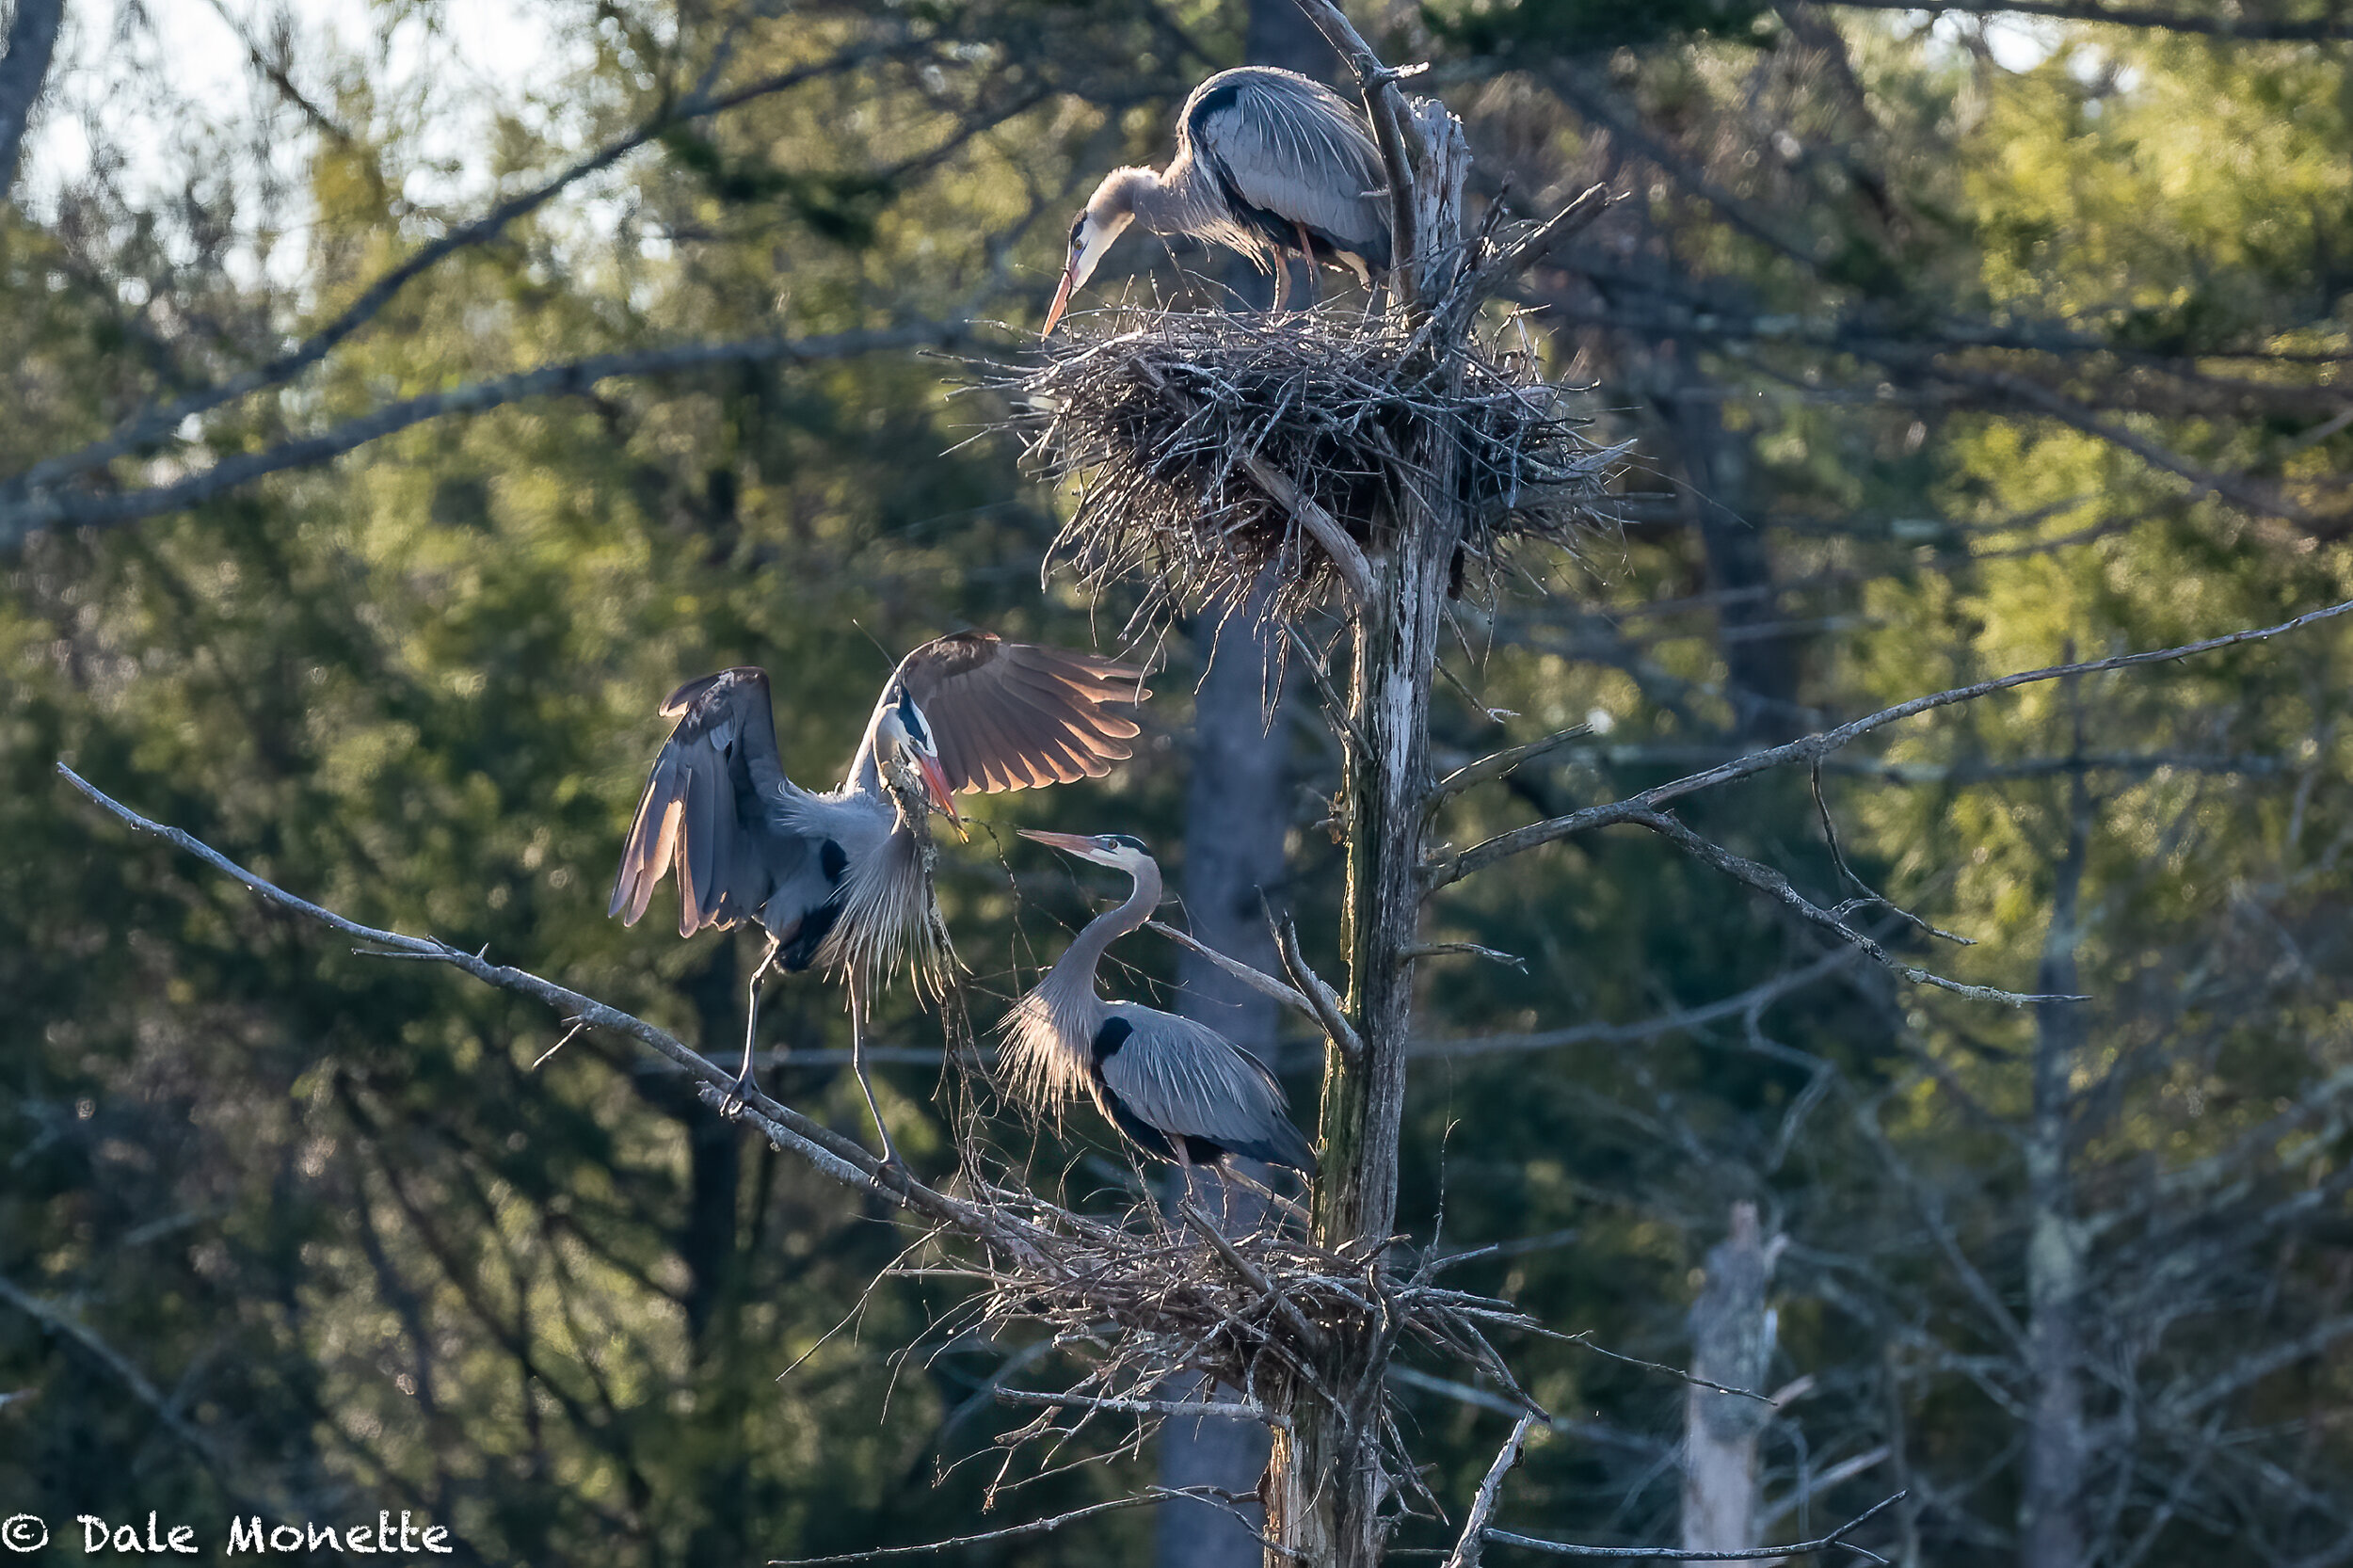   Nest building is moving right along with the number of nests growing in this great blue heron rookery from 4 to 7 in the last 2 days….  